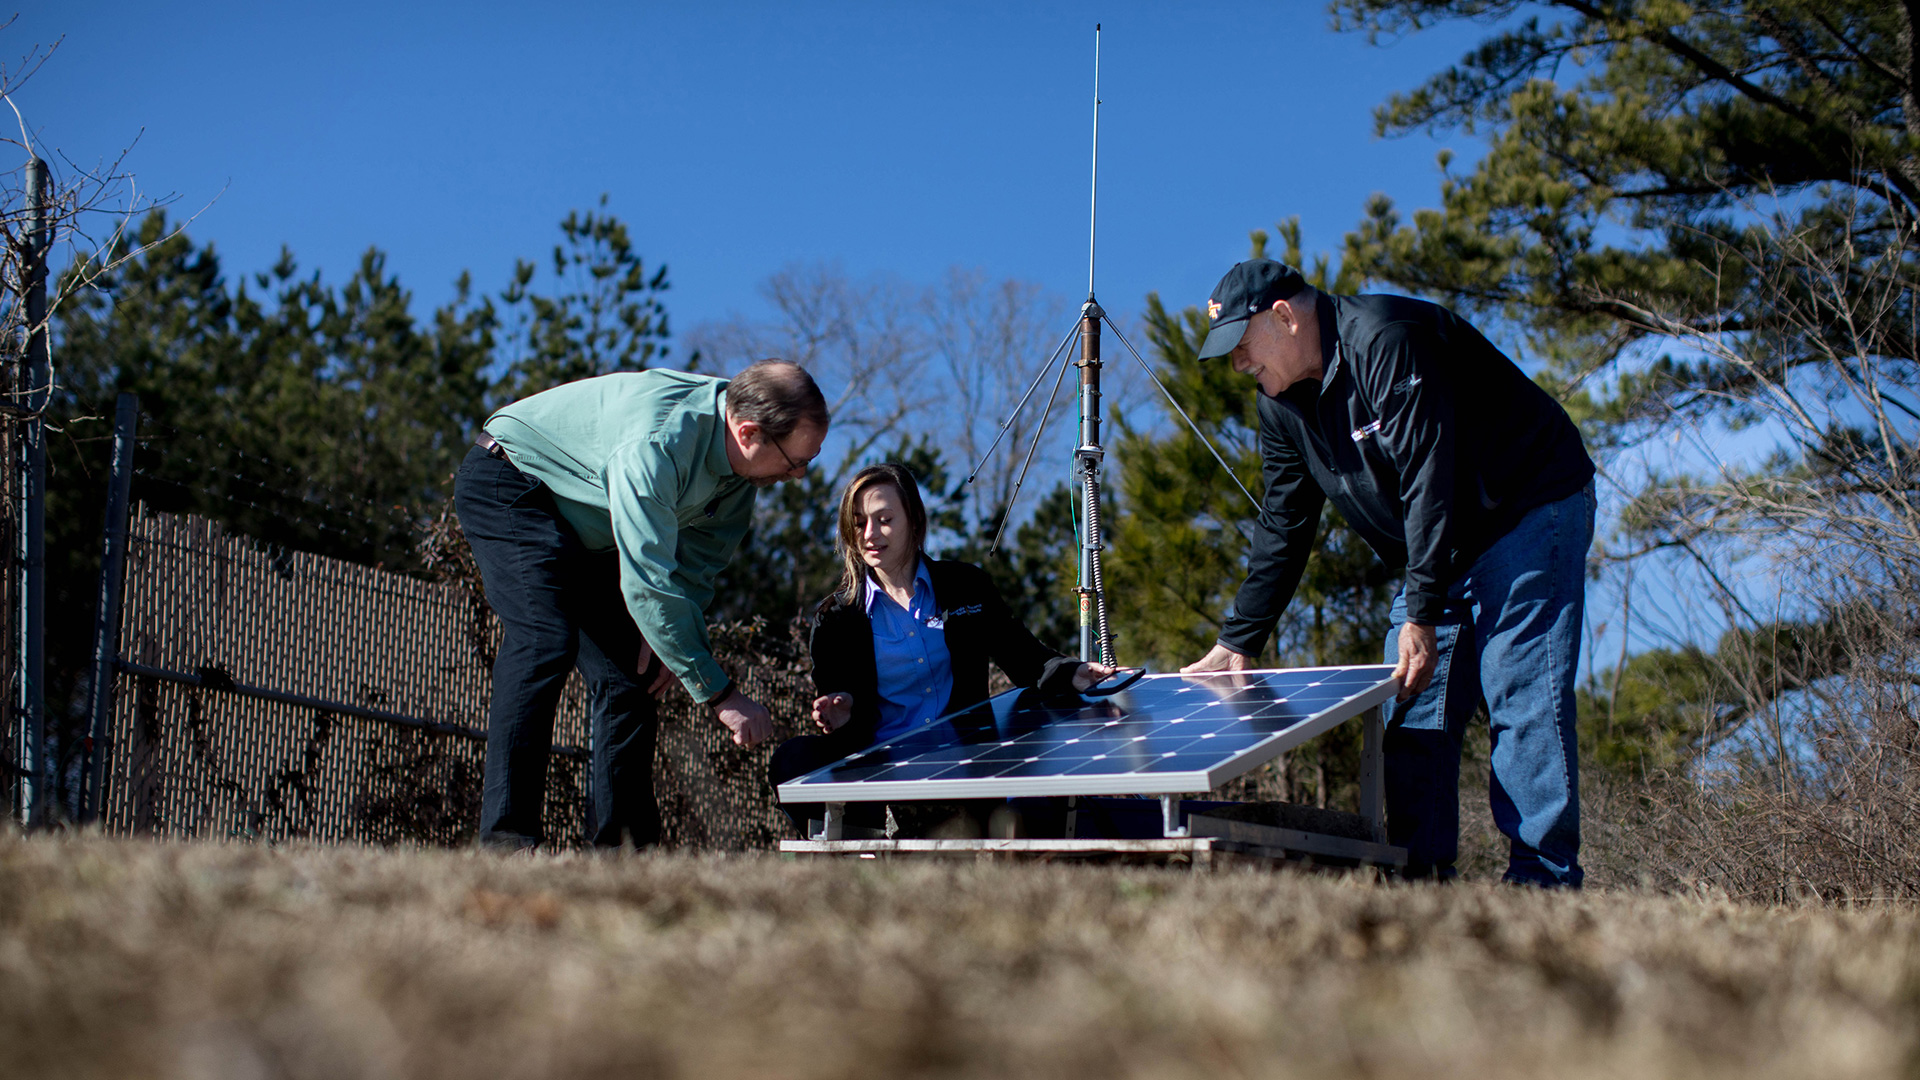 photo: two men and one woman, working outdoors in a field on a crisp Fall day, examine weather equipment.